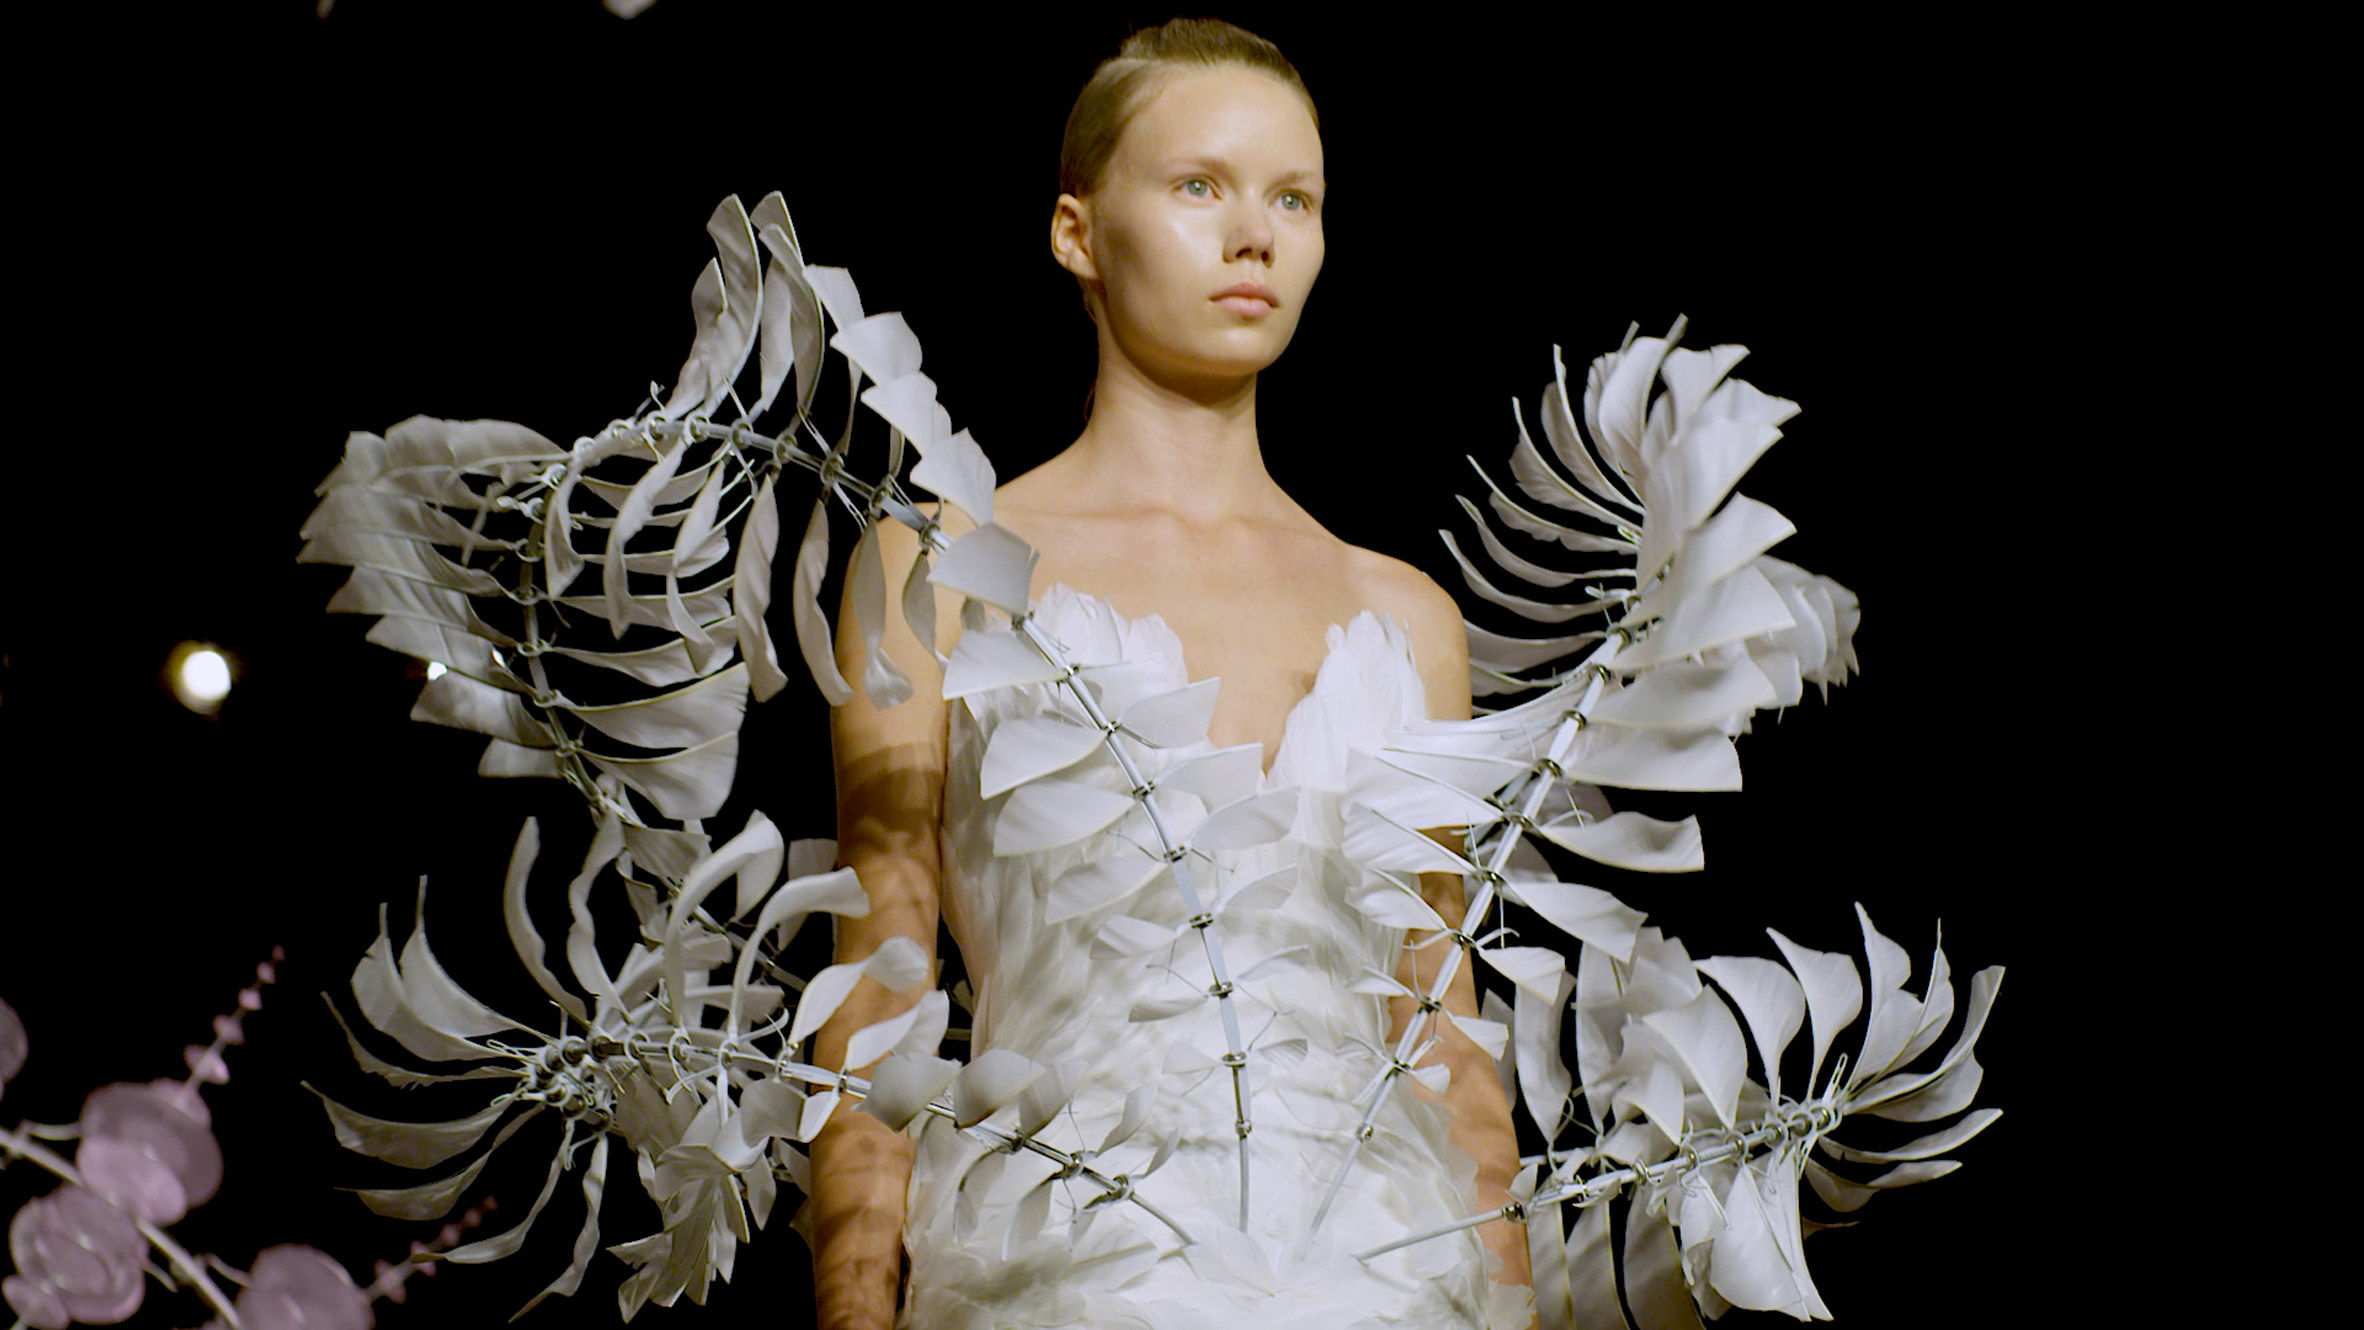 Iris van Herpen "hopes you can't see where her garments begin and the skin ends" 